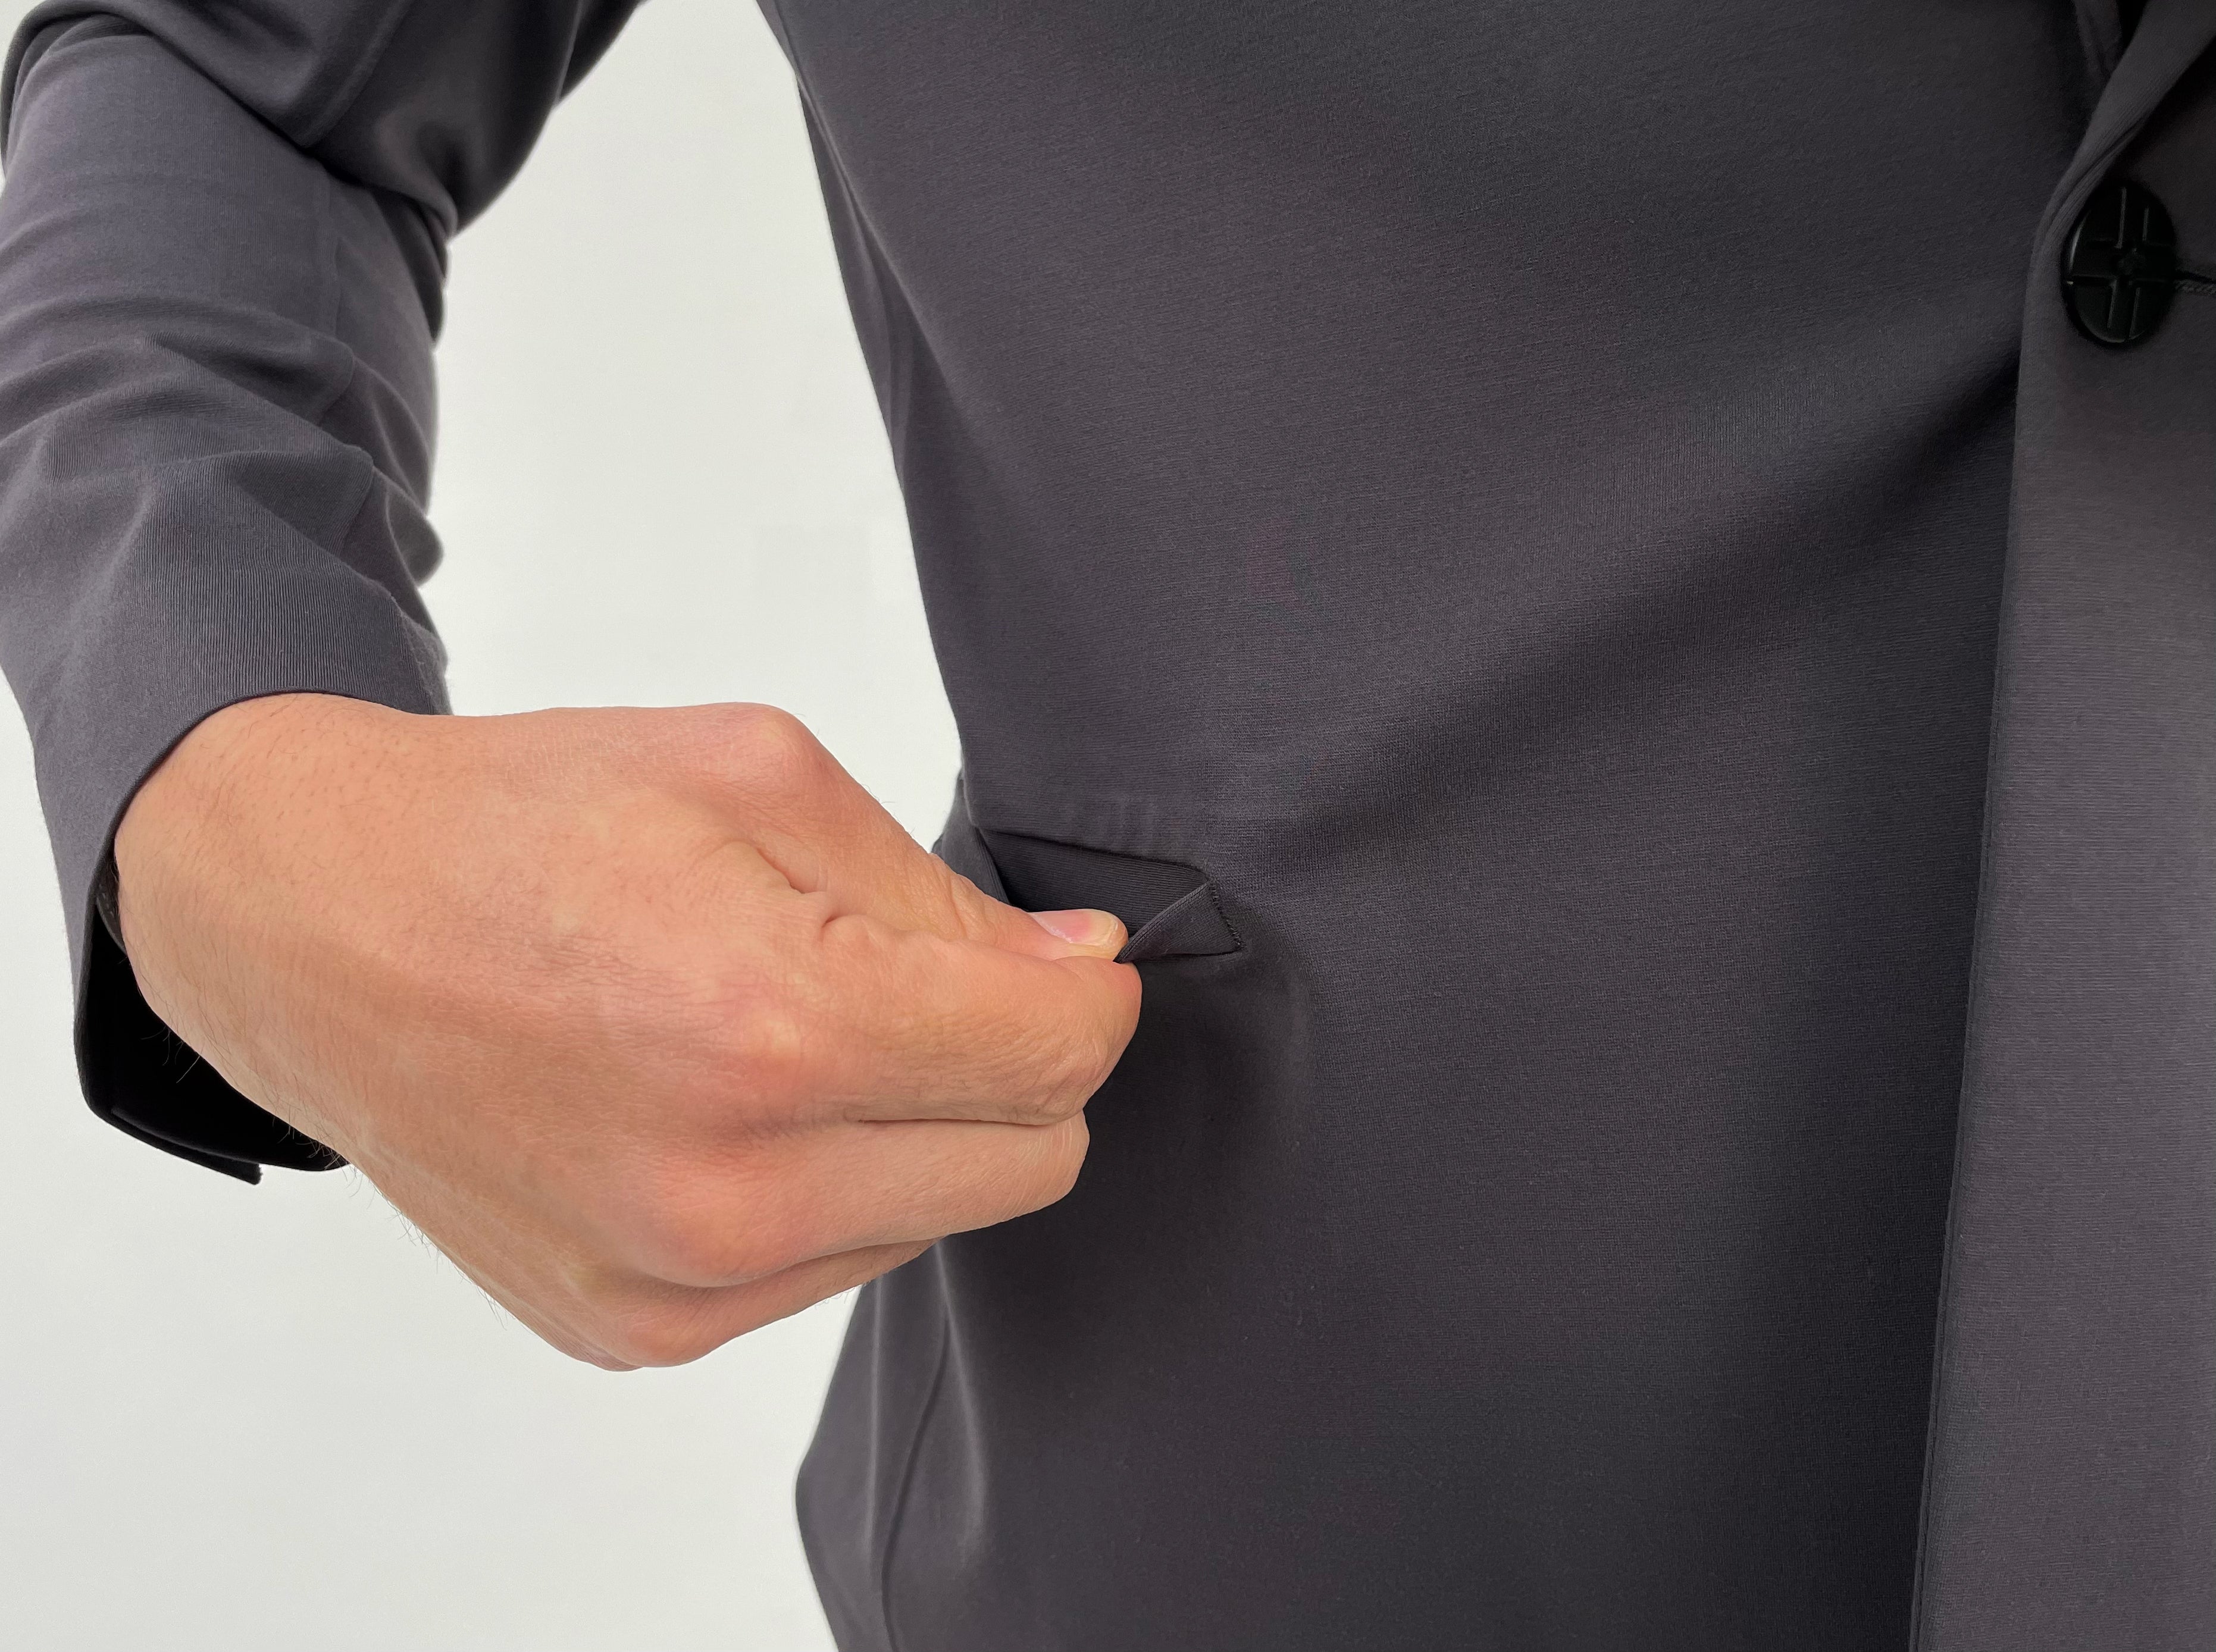 How To Fold A Suit Jacket  3 Simple Ways To Pack Sports Jackets